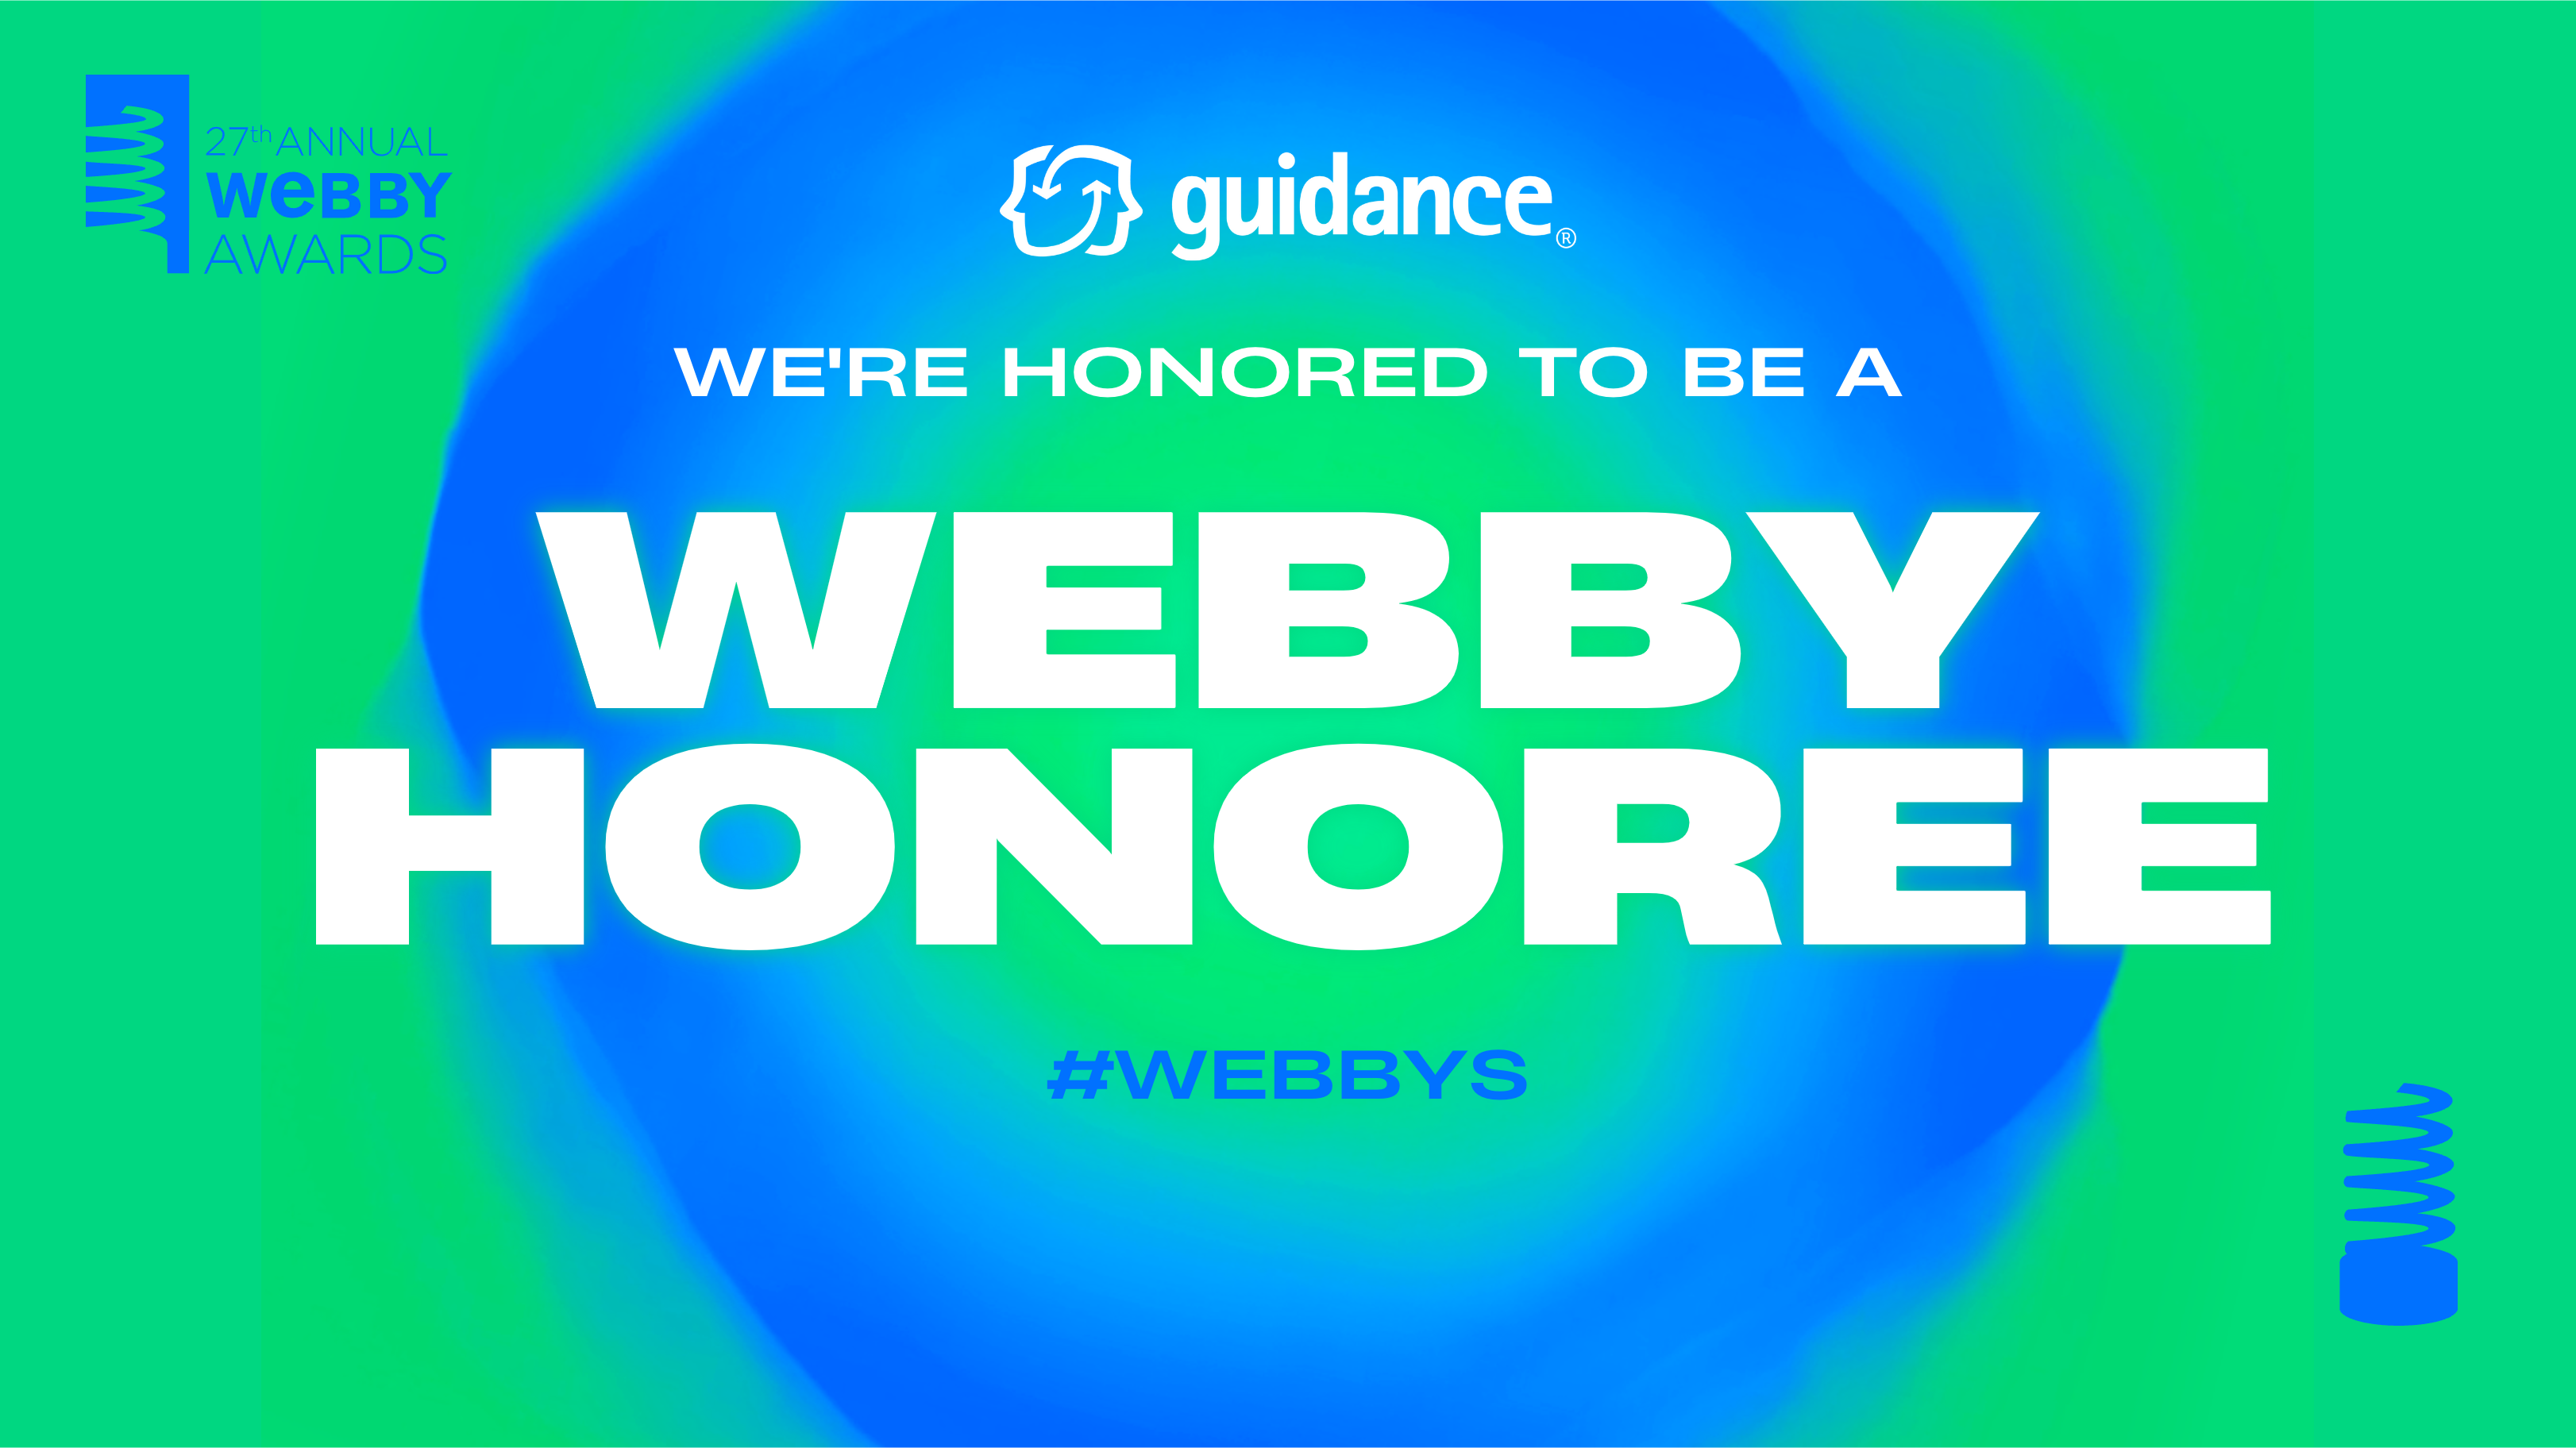 Guidance Honored in The Webby Awards for its Hearst Website